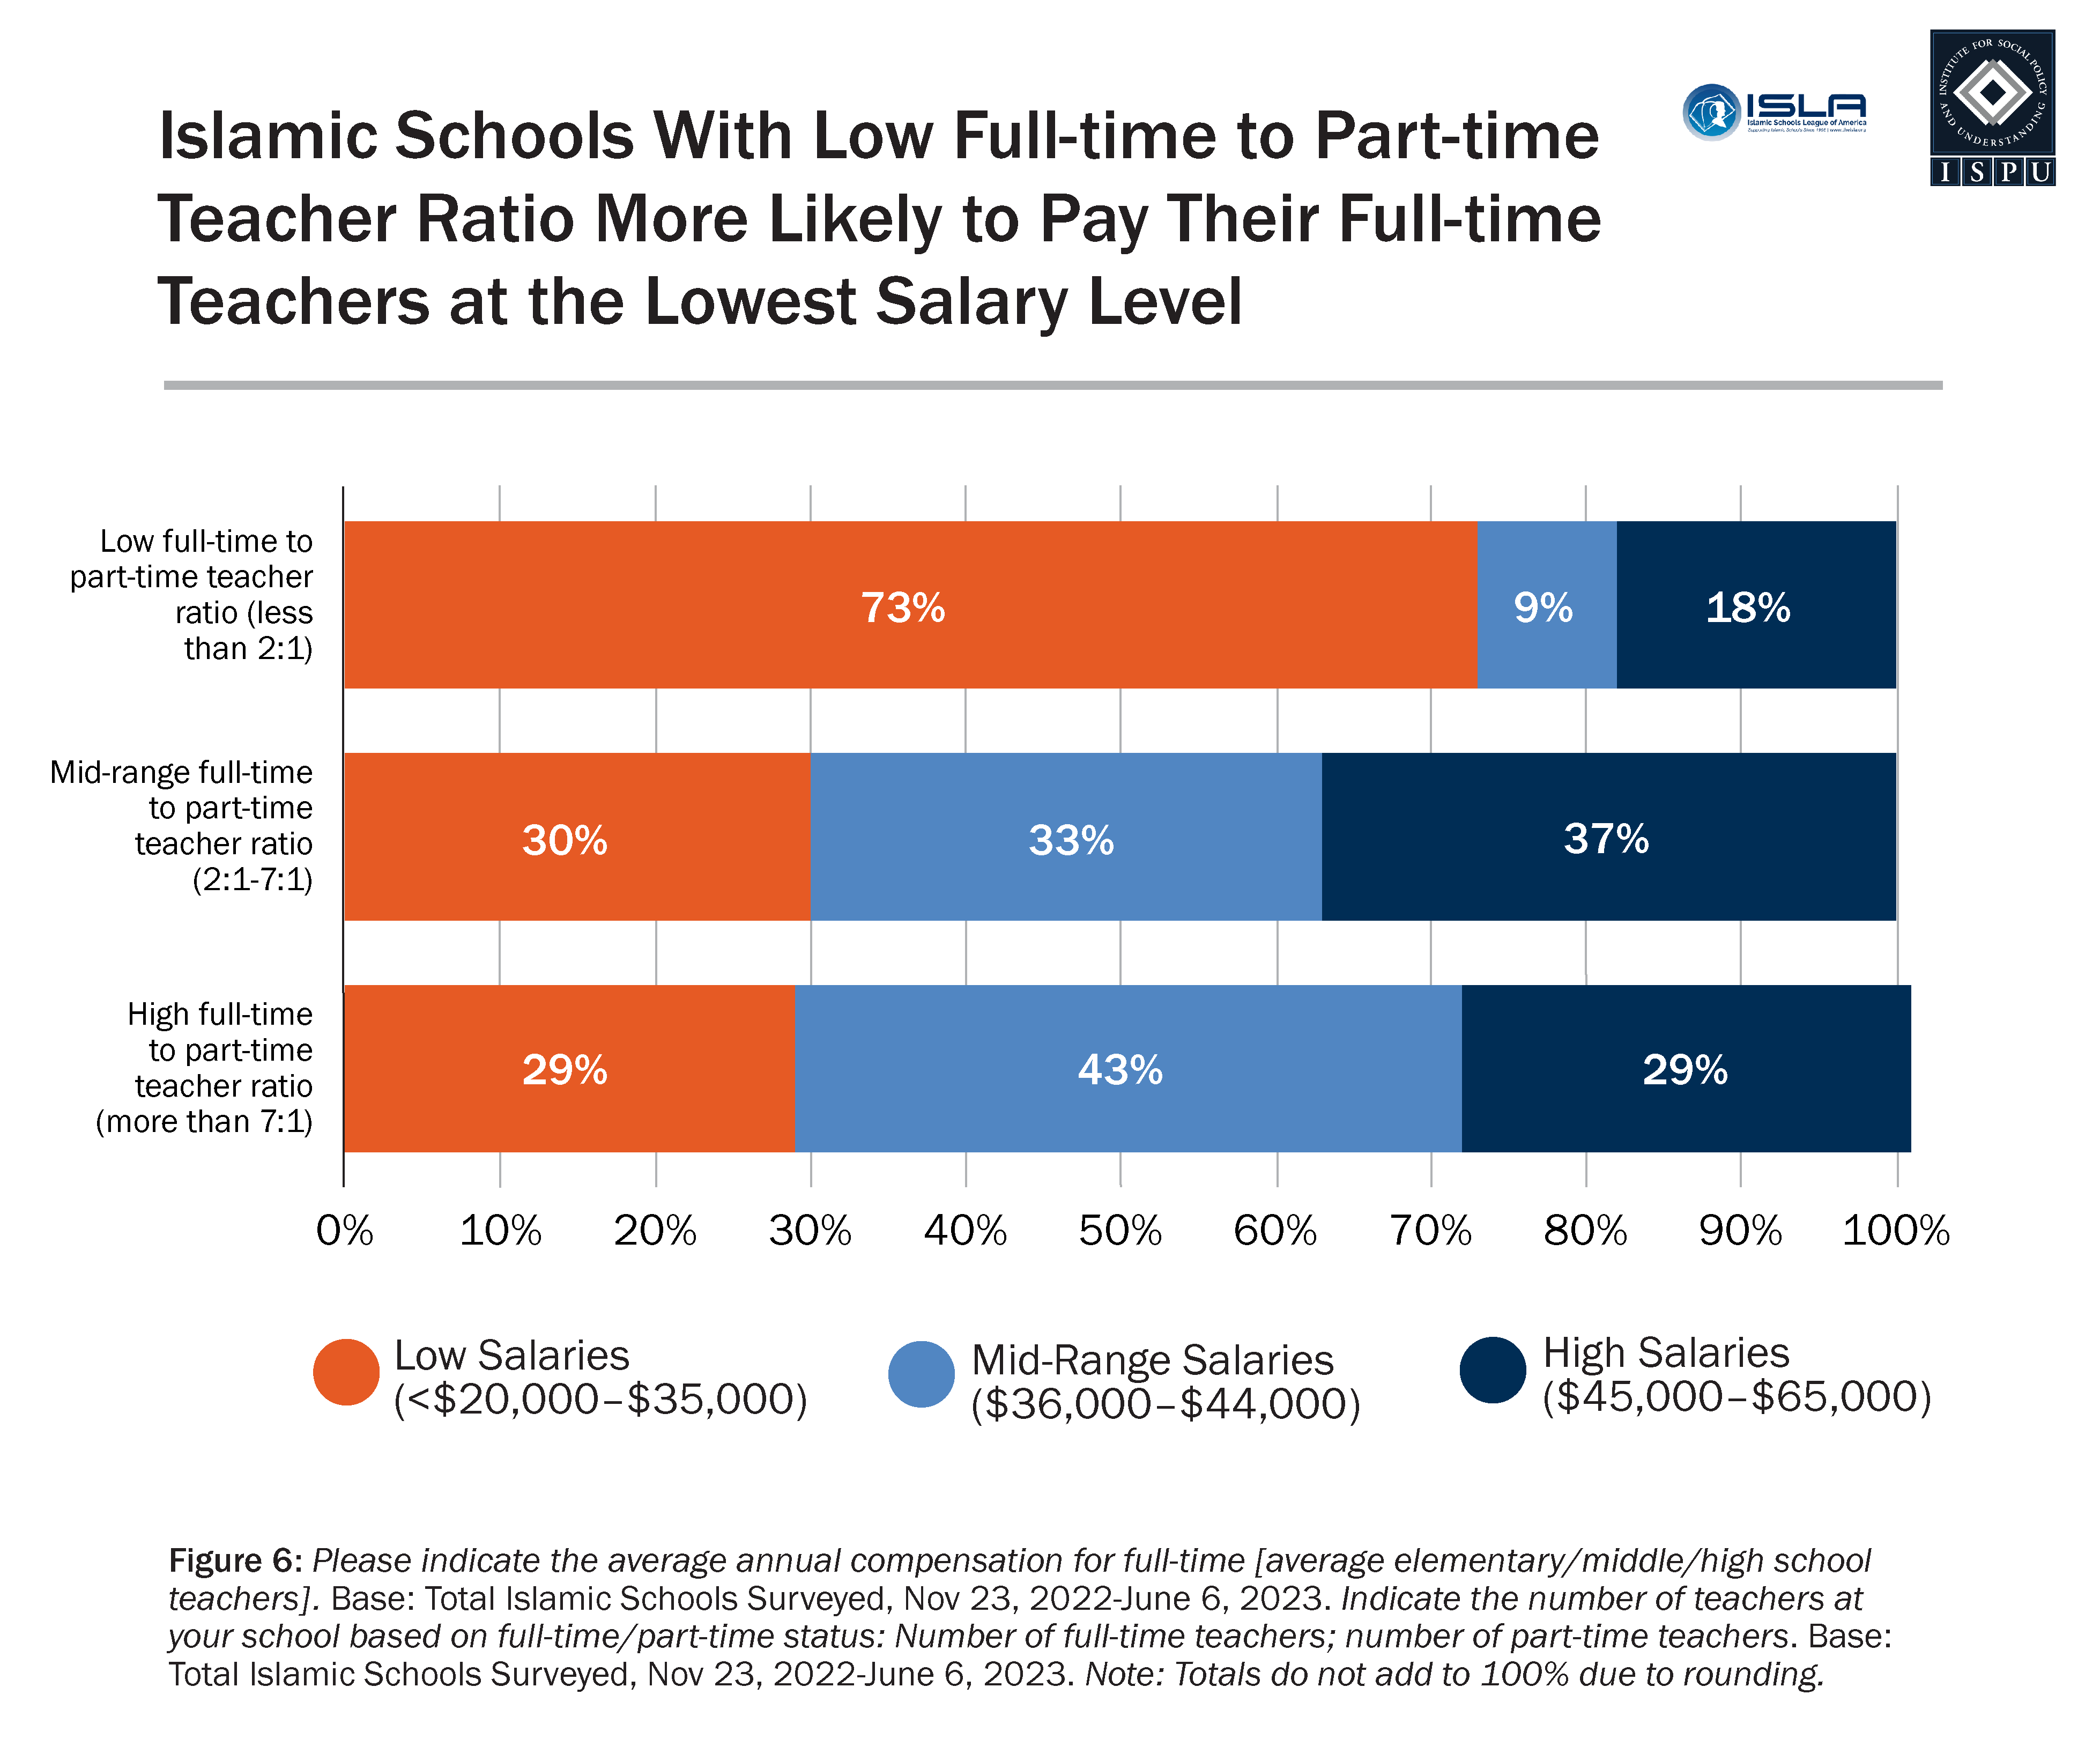 A horizontal bar graph describing the proportion of Islamic schools at low, mid-range, and high salaries based on the ratio of full-time to part-time teachers on staff.